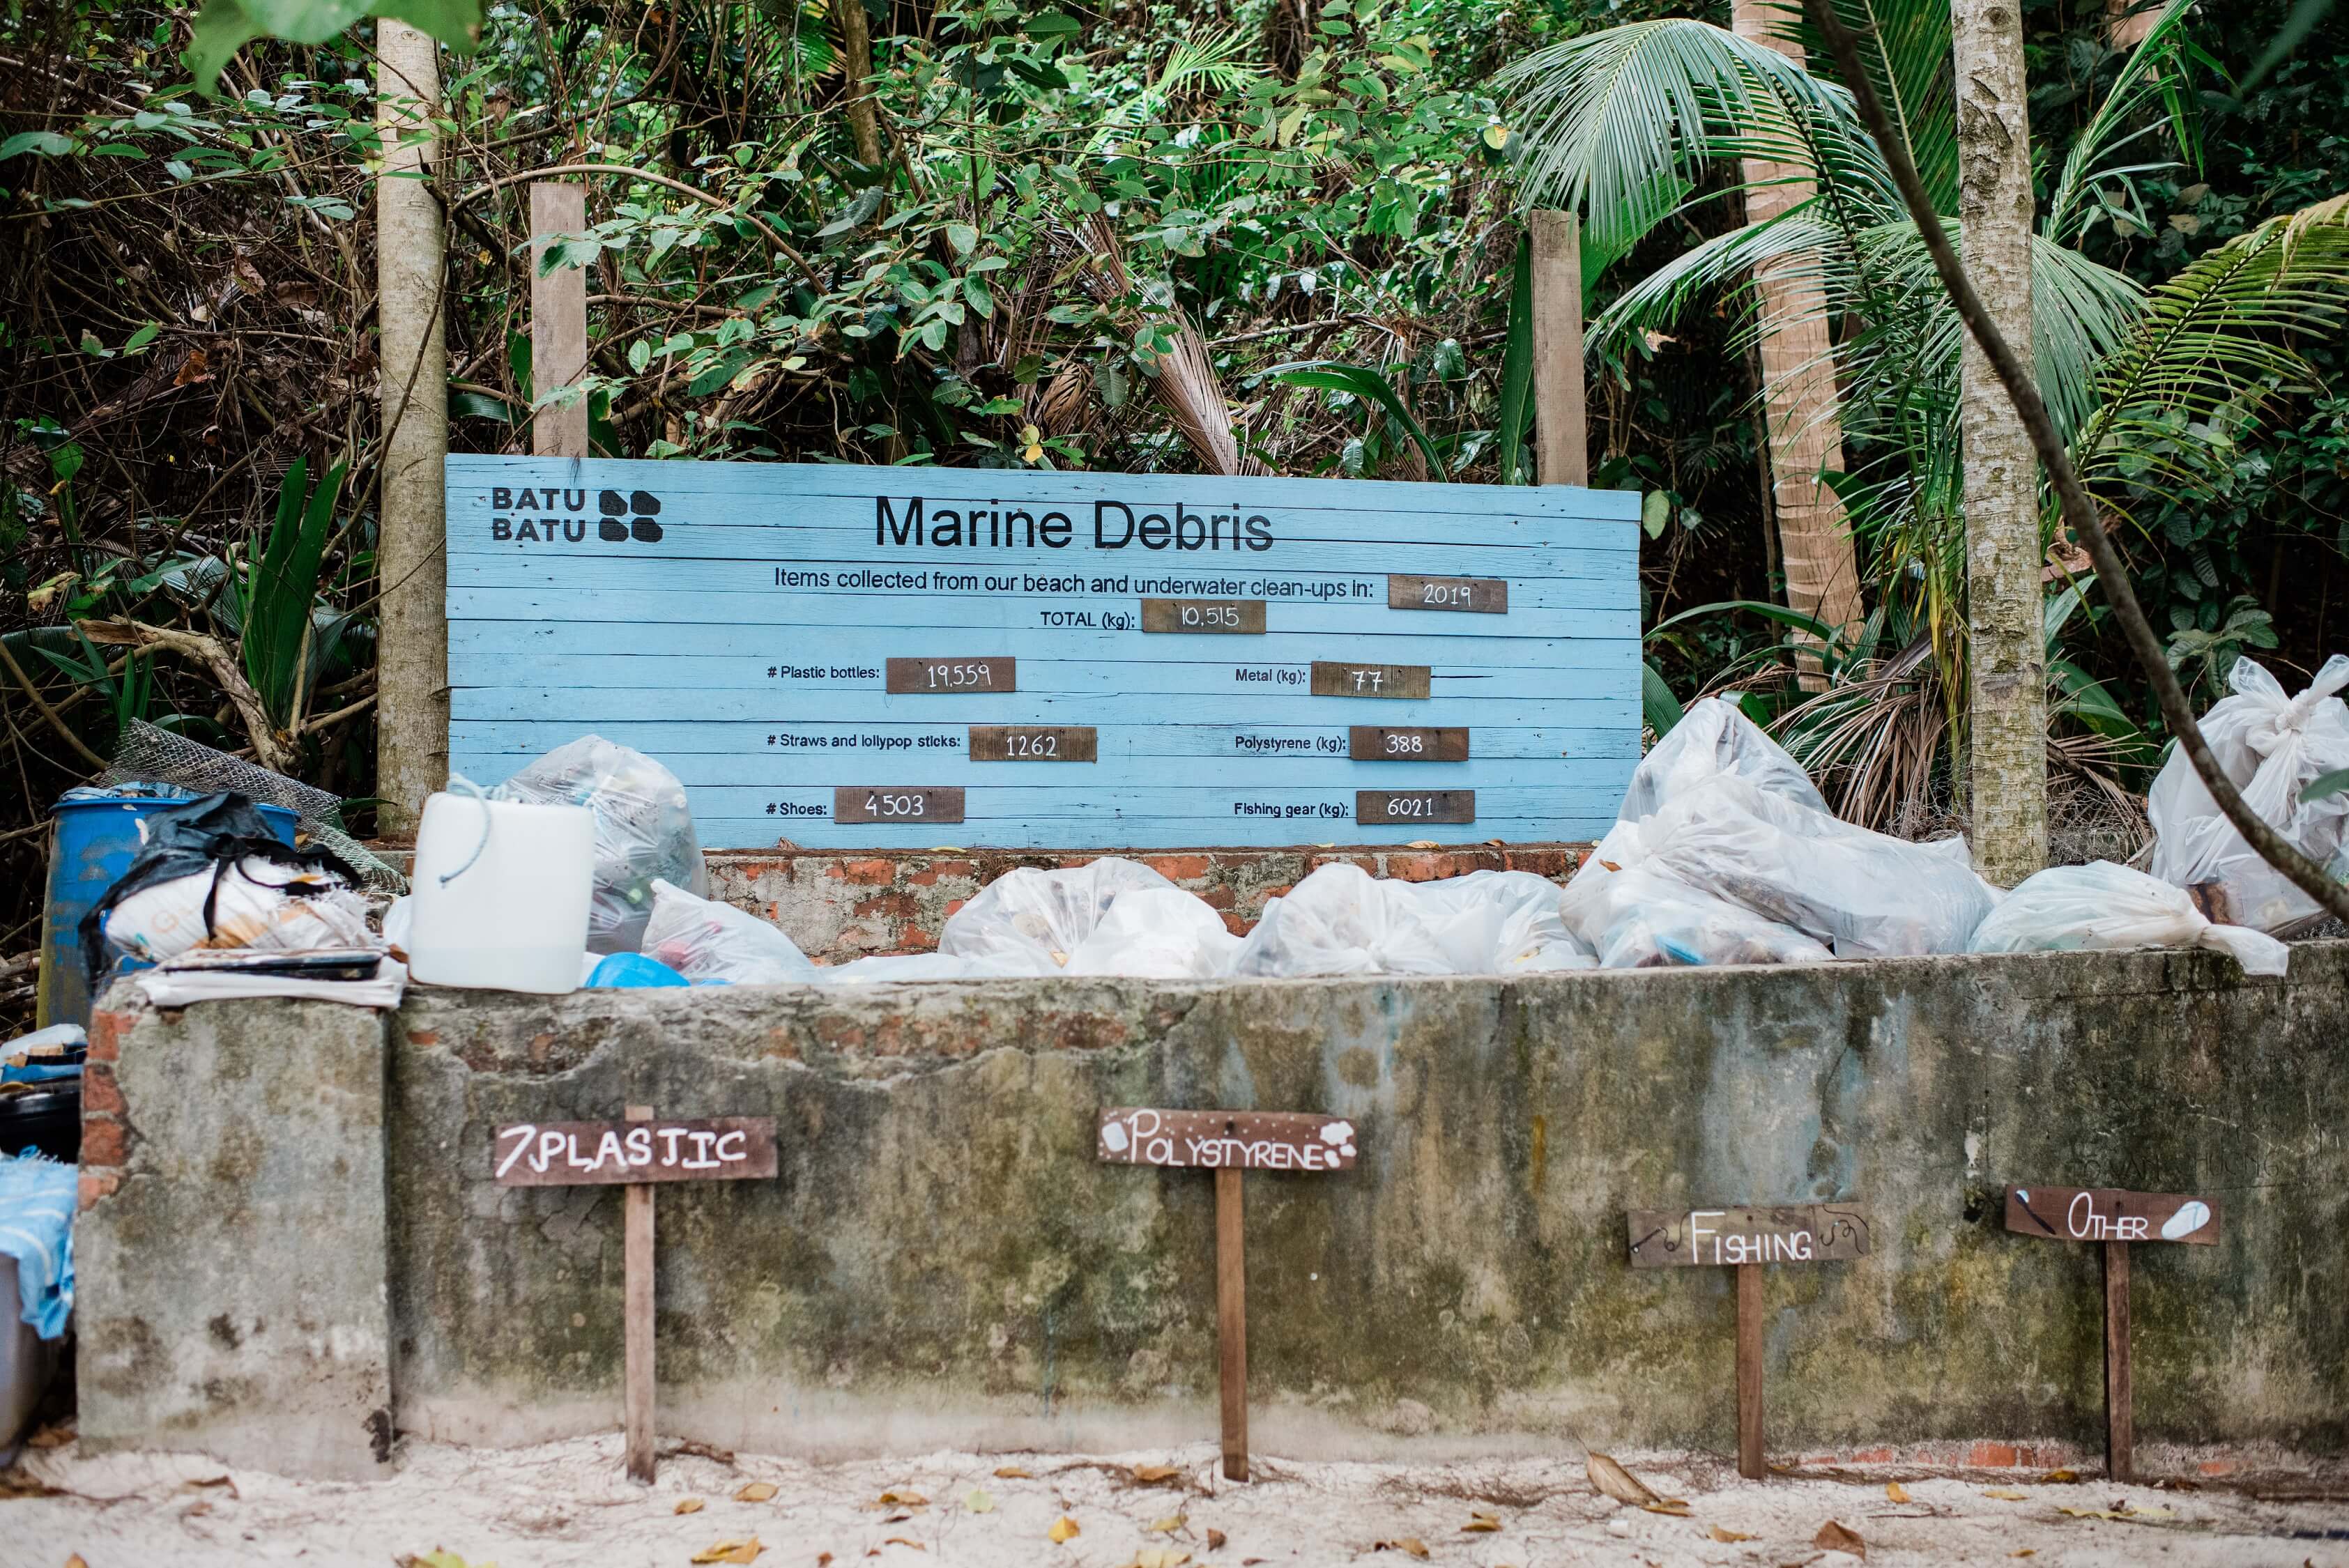 The waste collected on Tengah is sorted and sent to Clean & Happy Recycling in Mersing. In 2018 and 2019, they collected close to 23,080 kg of mixed marine debris (which included 44,140 individual plastic bottles) and removed 10.56 tonnes of “ghost gear” such as lost fishing nets. Photo by Kenny Ng